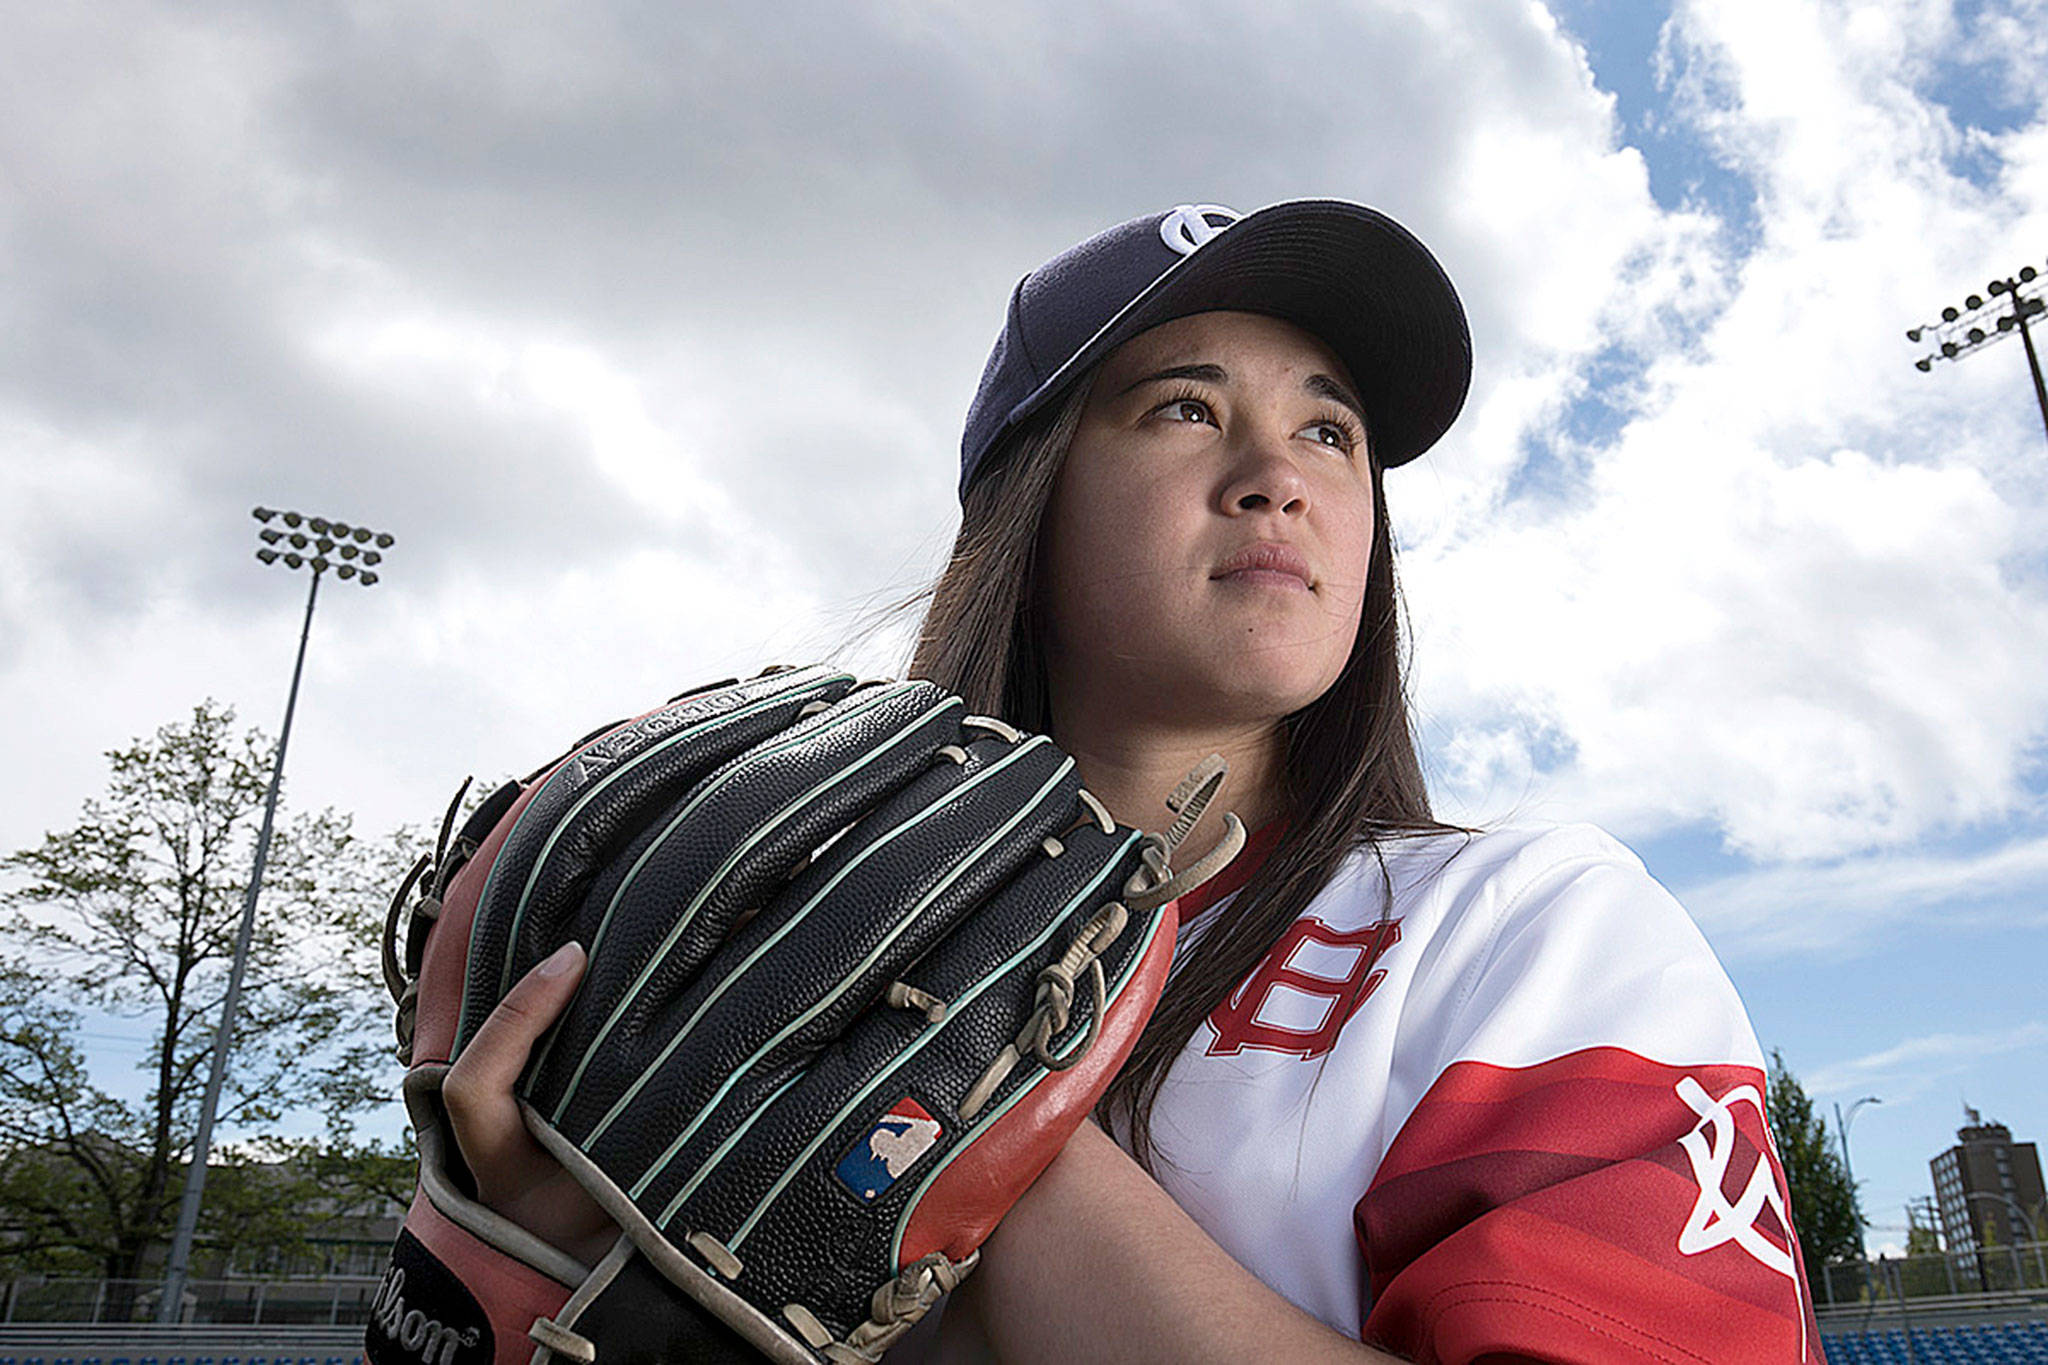 LEFTIES BASEBALL: HarbourCats sign Canadian woman as pitcher